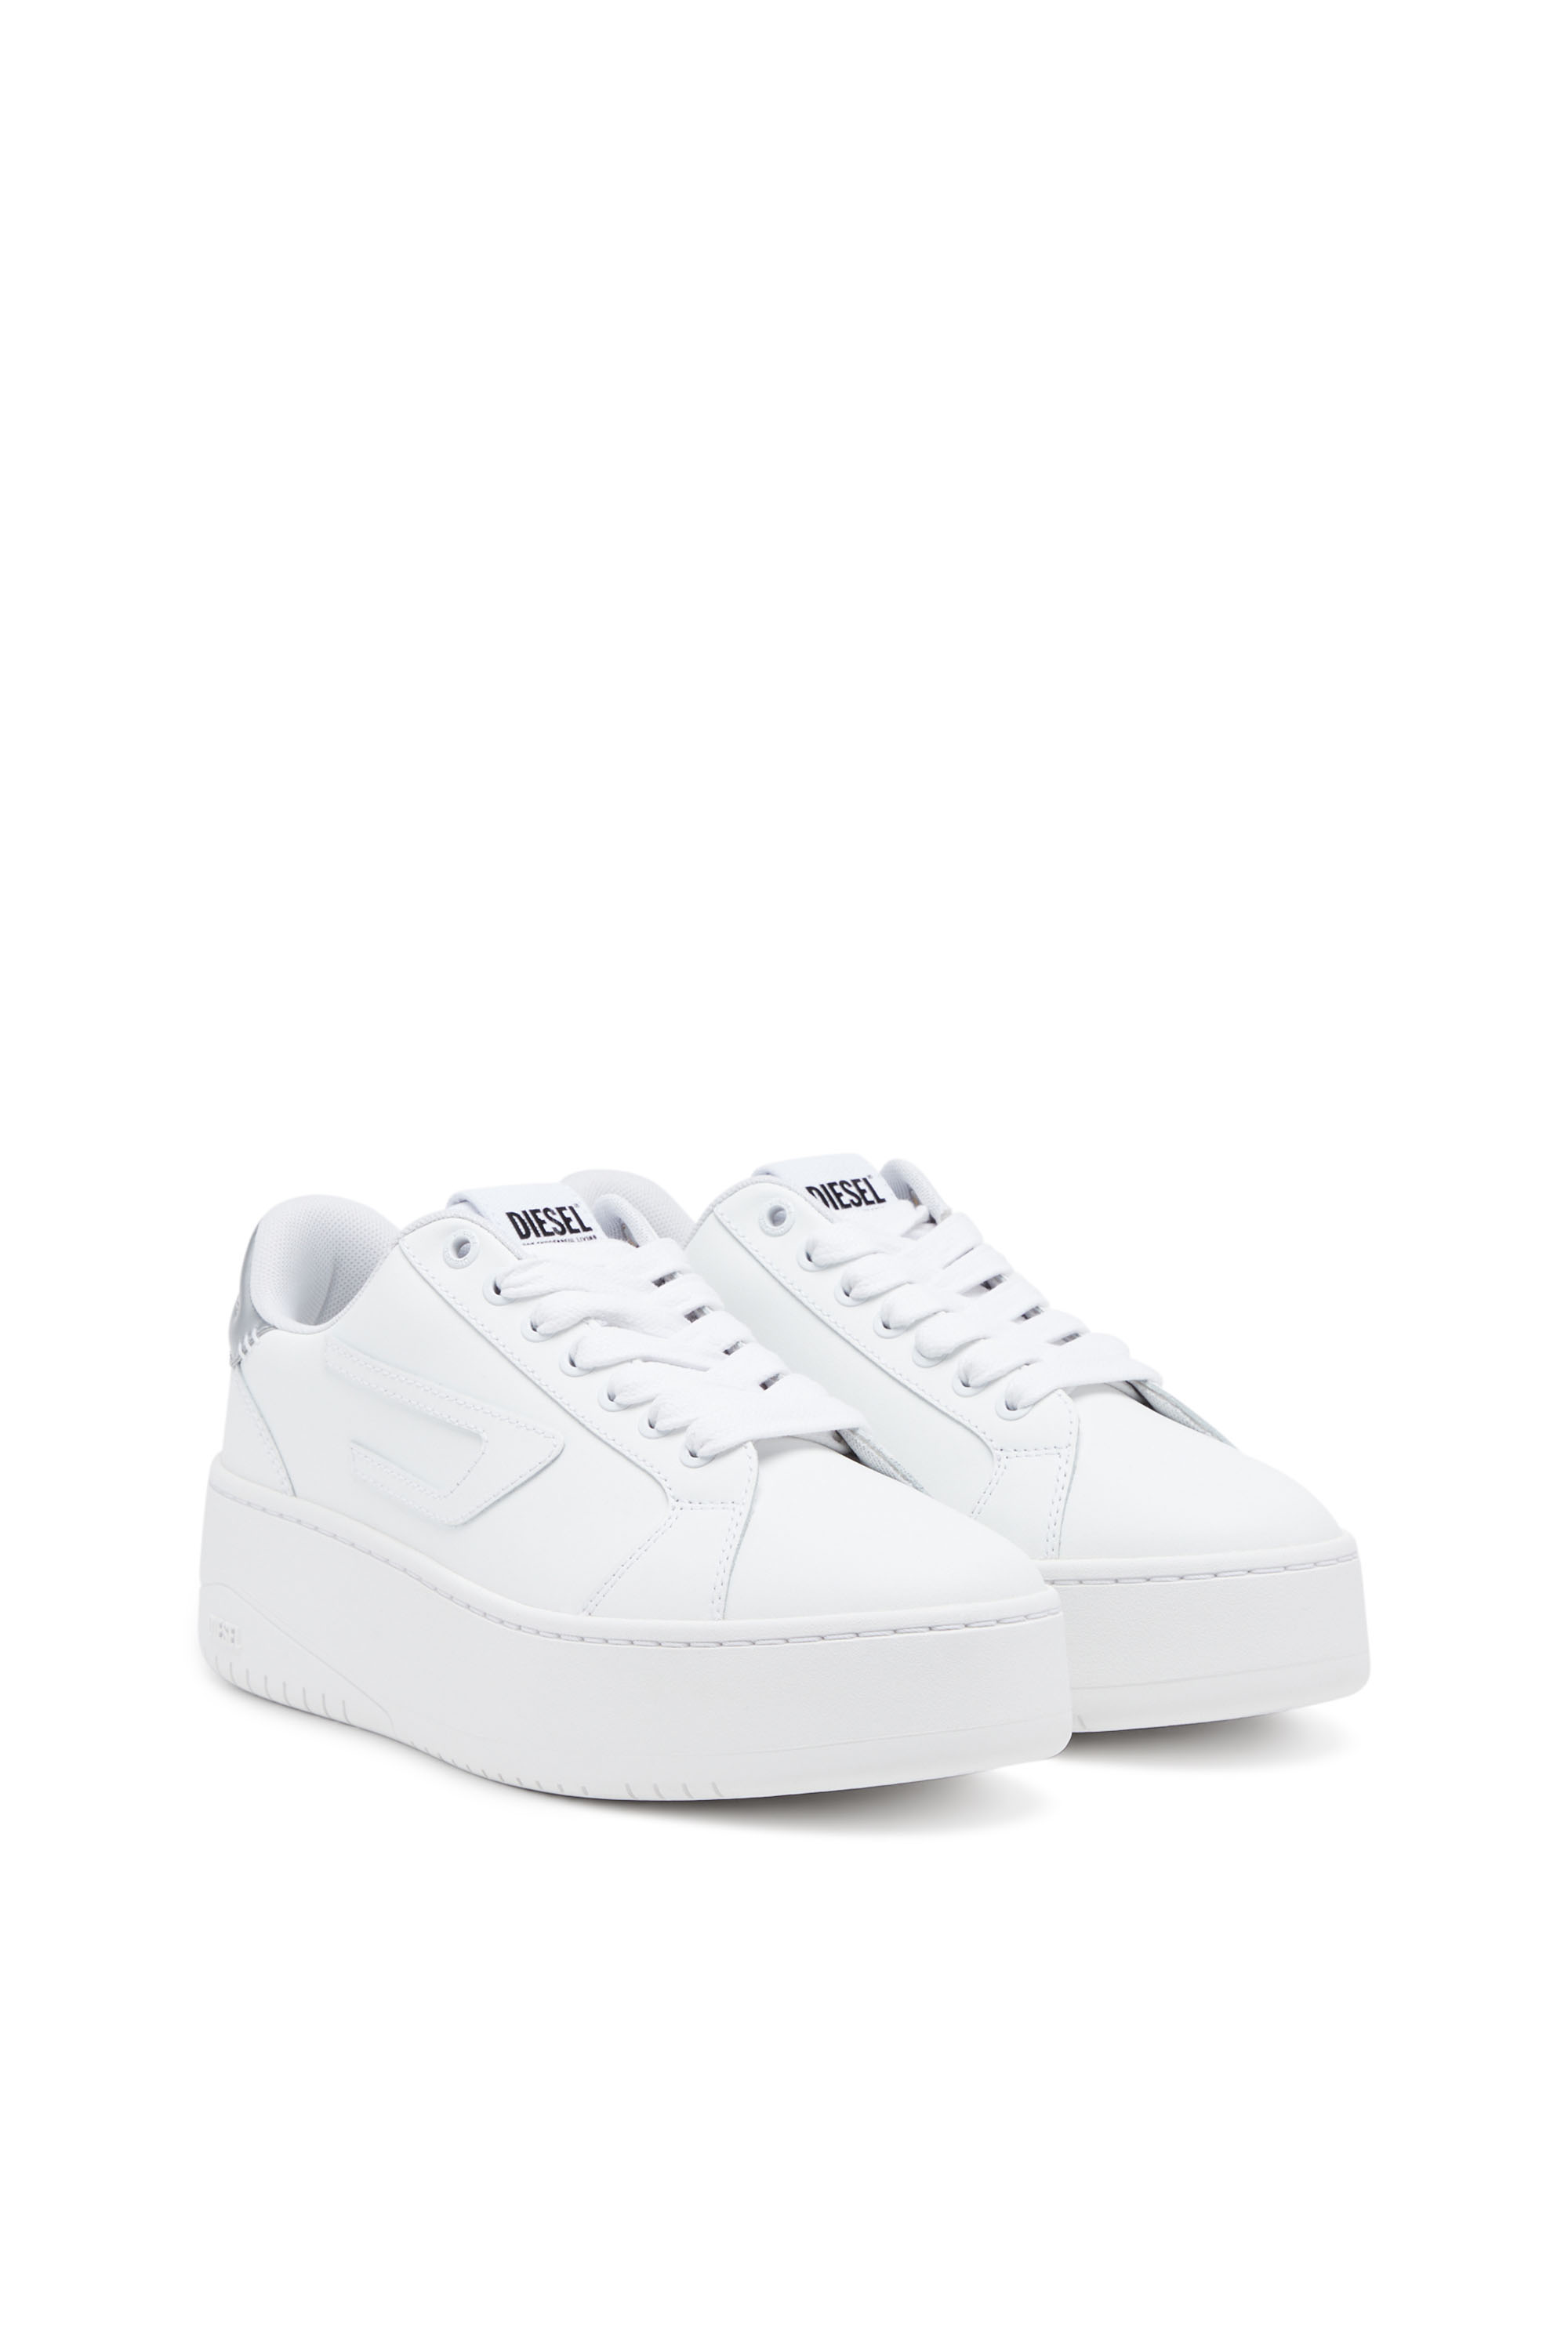 Diesel - S-ATHENE BOLD W, Woman S-Athene Bold-Low-top sneakers with flatform sole in White - Image 2